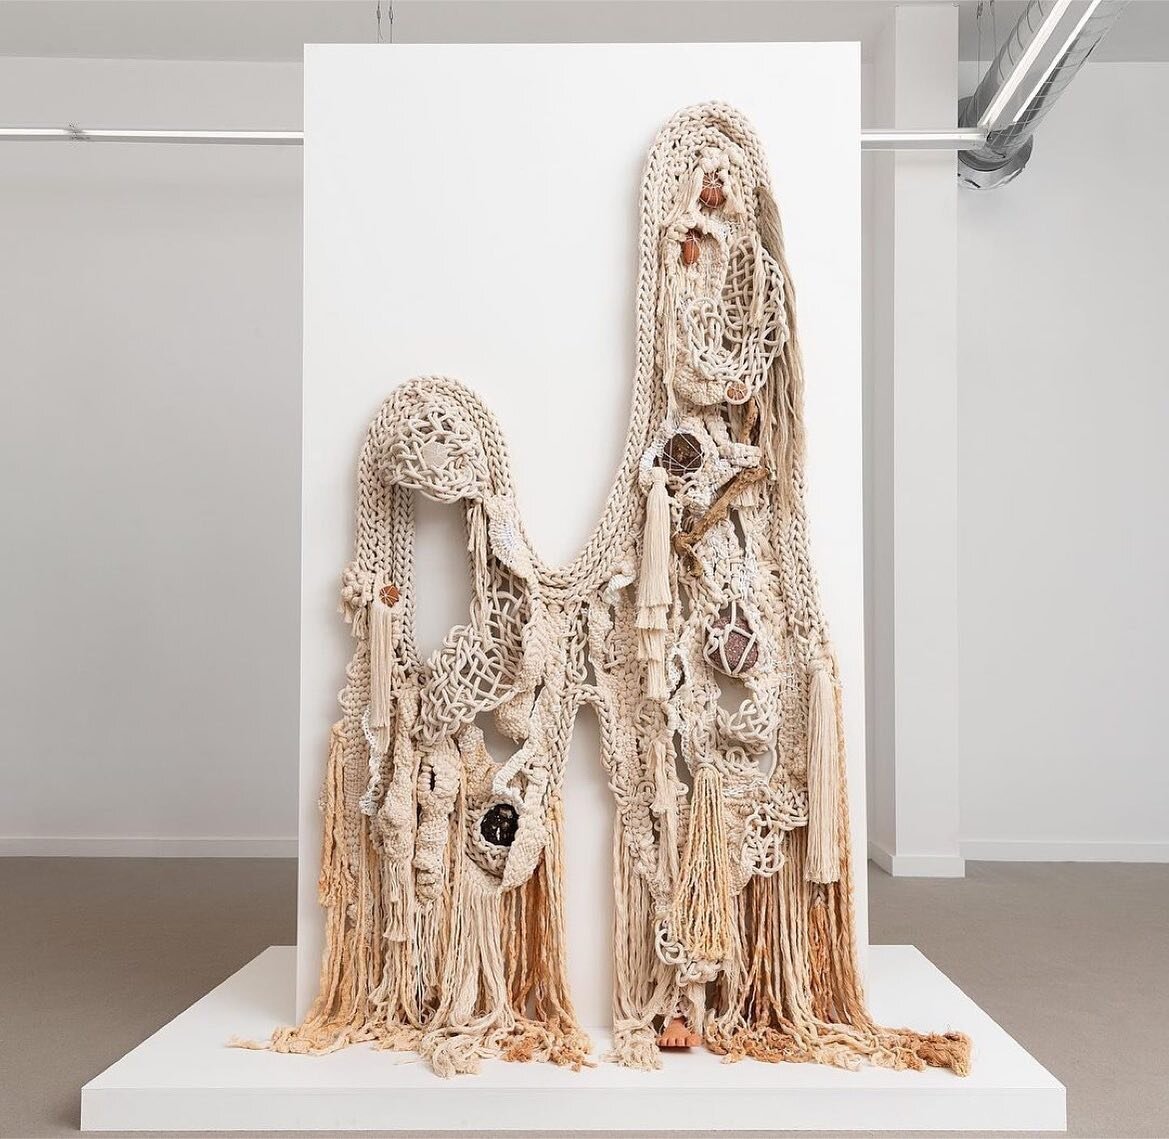 💫💫💫💫💫

Tanya Agui&ntilde;iga, Swallowing Dirt.
.
.
.
Pictured: External Body, 2023

Cotton rope, low-fire terracotta, flax, found objects from the LA River: tumbled bricks, glass, pavement and cement, river root, dyed with terracotta clay, alumi